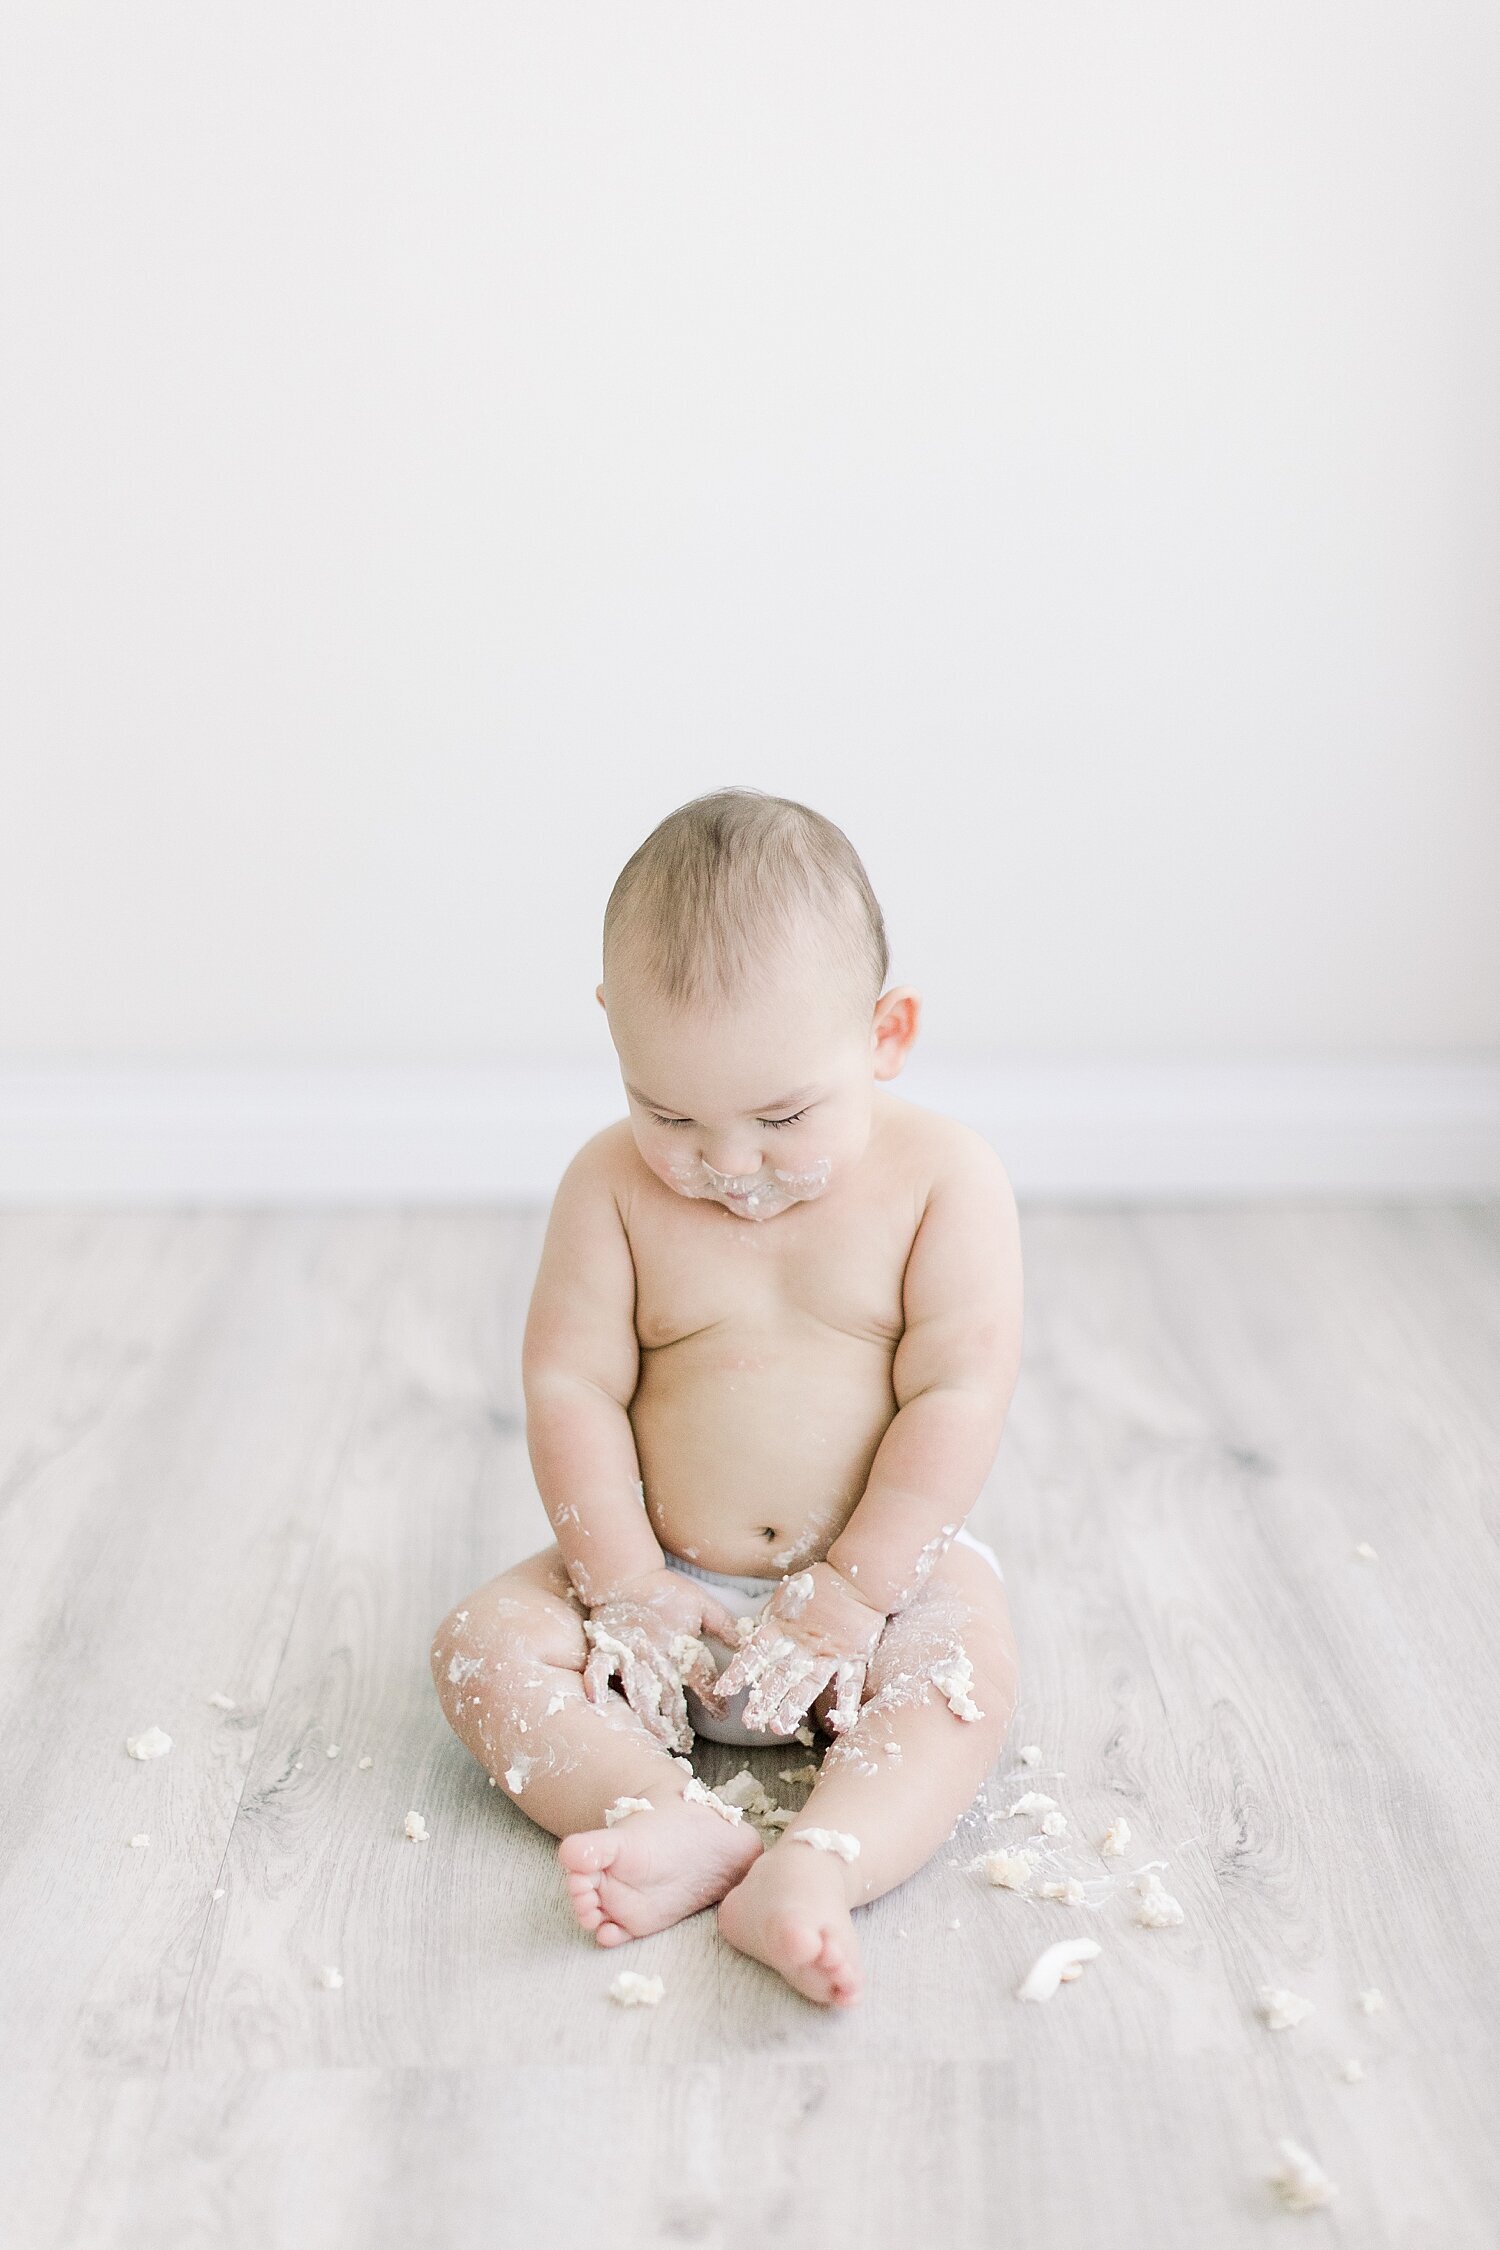 Aftermath of a one year cake smash birthday session. Photo by Ambre Williams Photography.